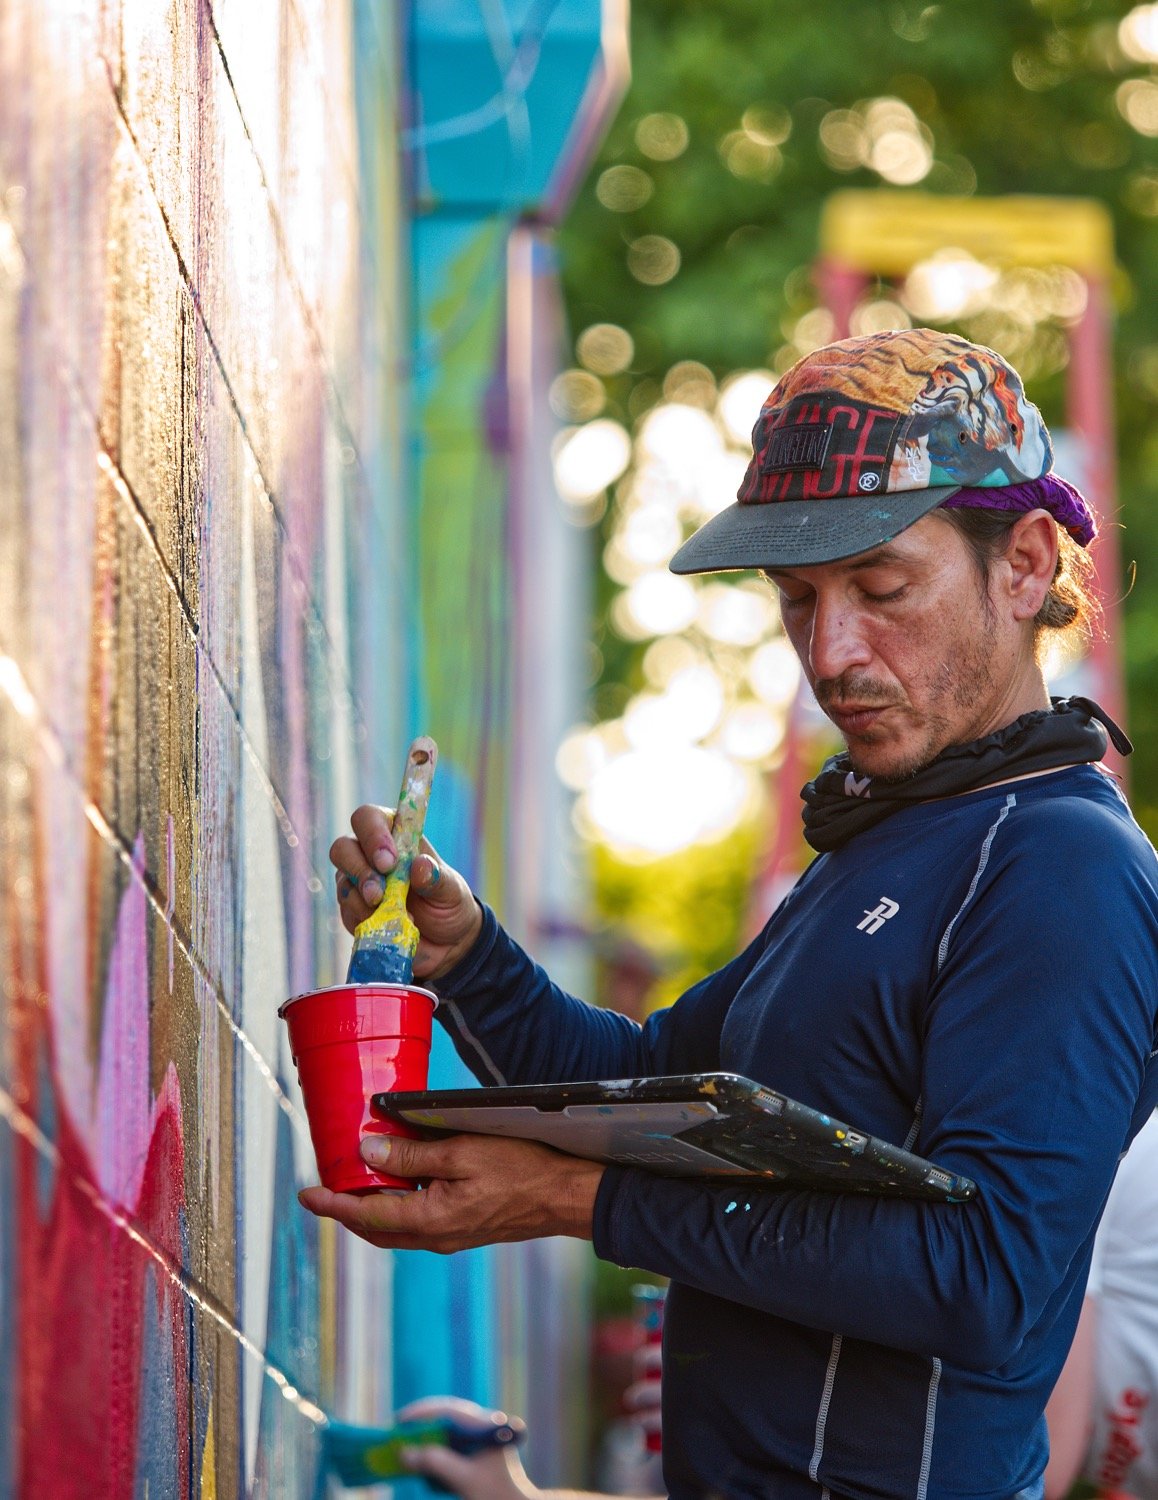 Miami muralist Luis Valle consults his design while painting the wall. [peruse more painting]